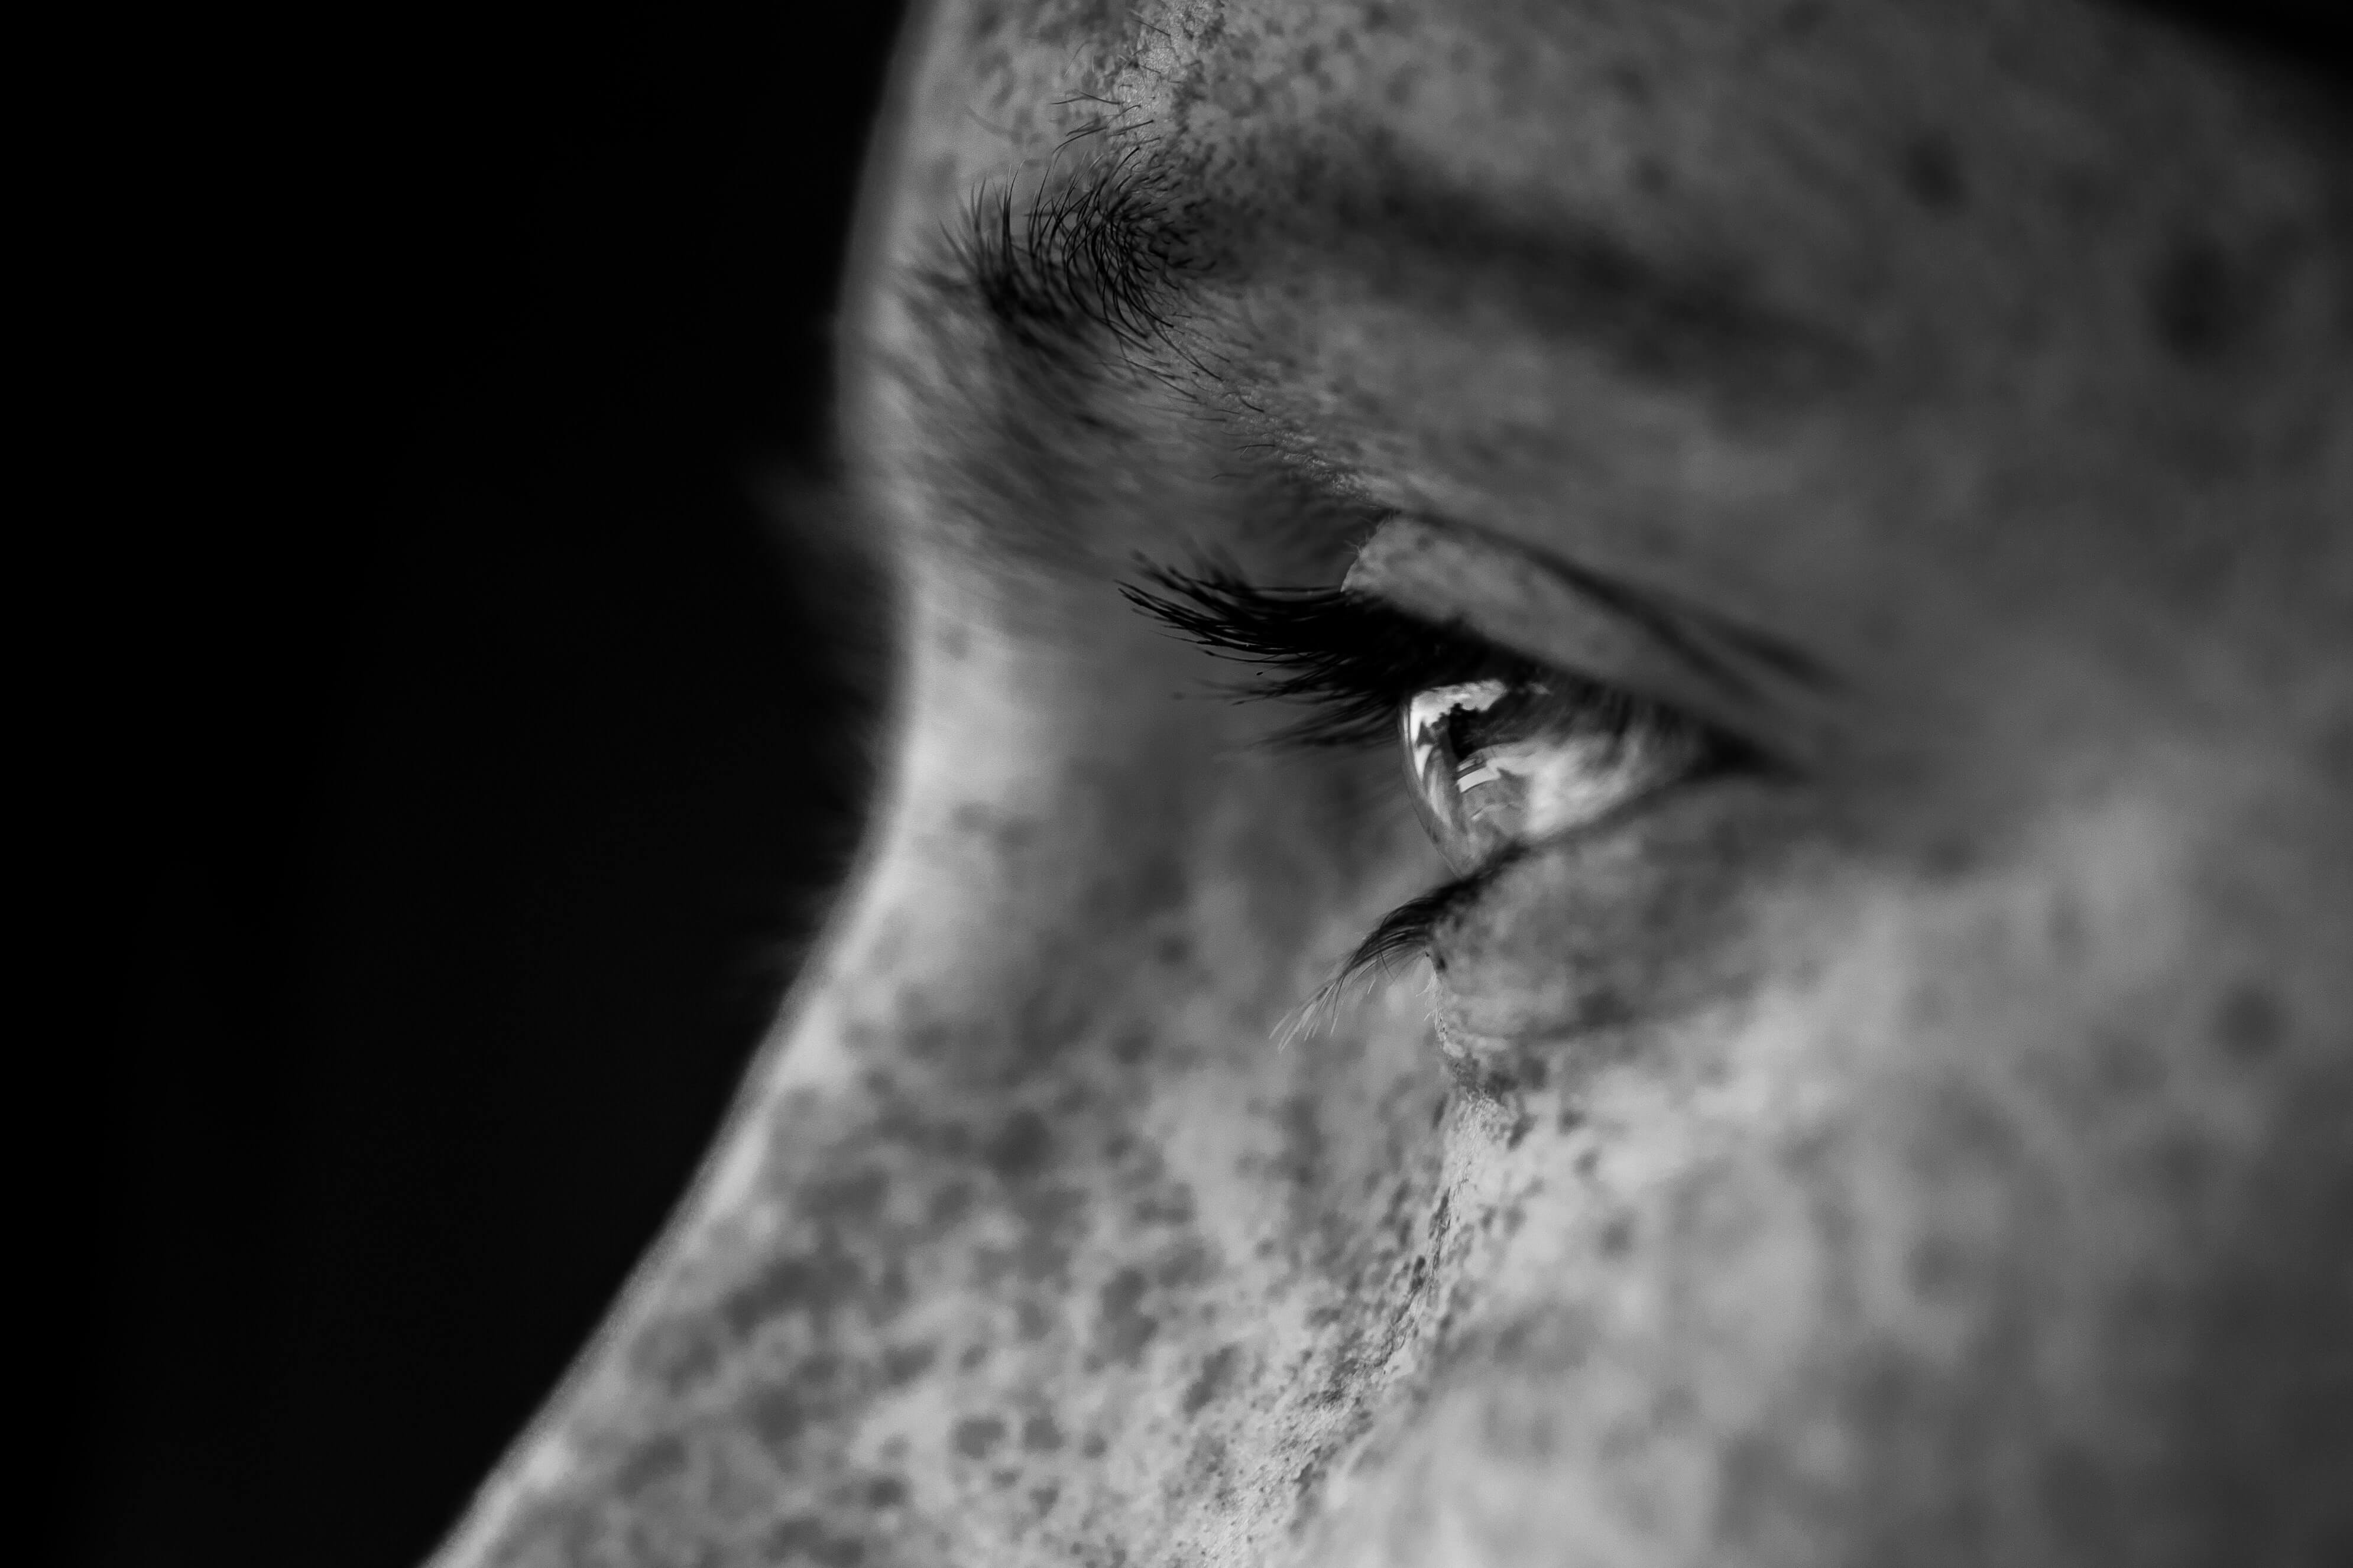 close up of man's eye and face with freckles